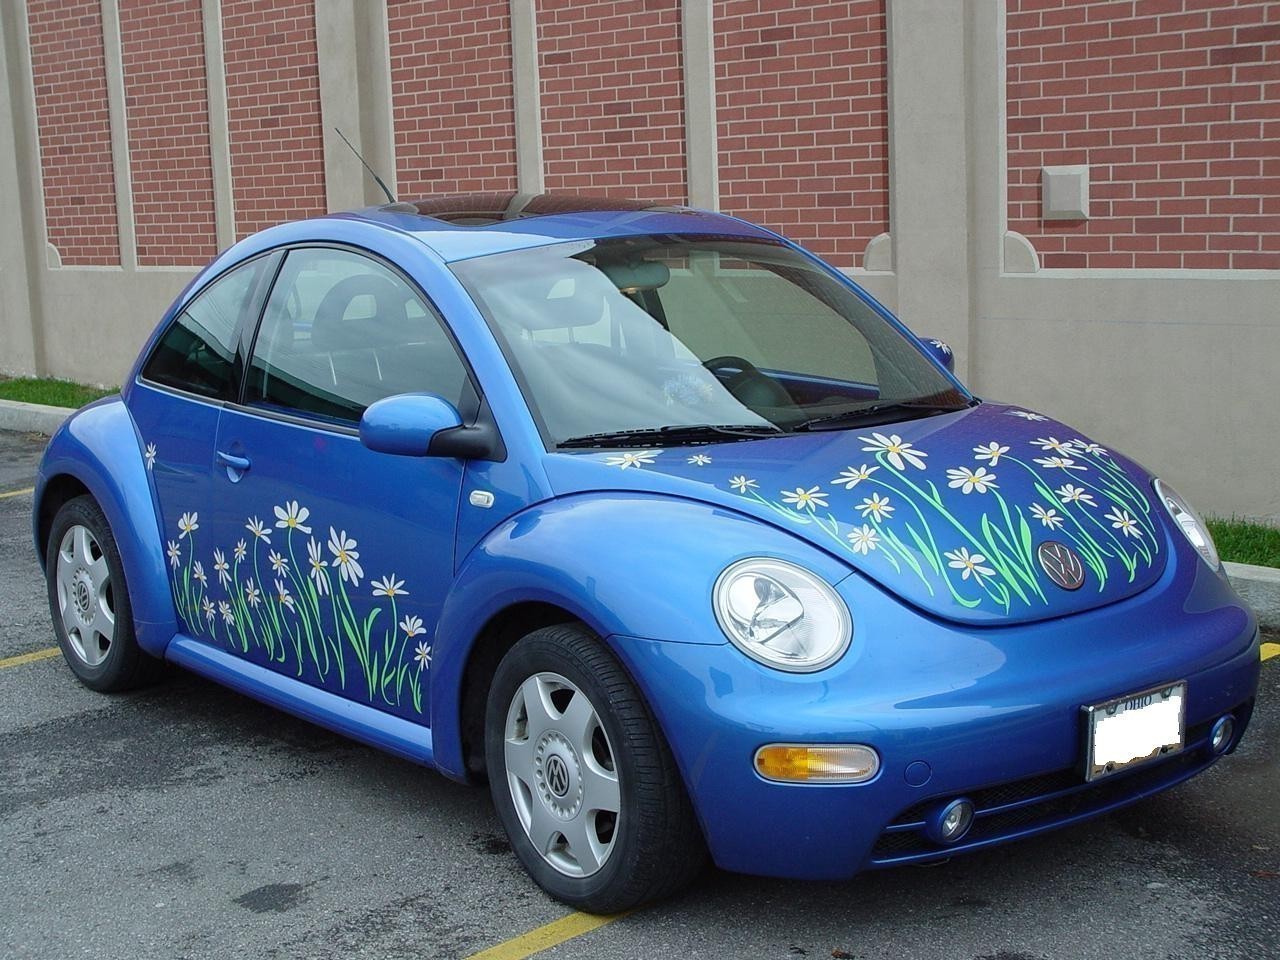 VW Beetle with Flower Decals Stickers